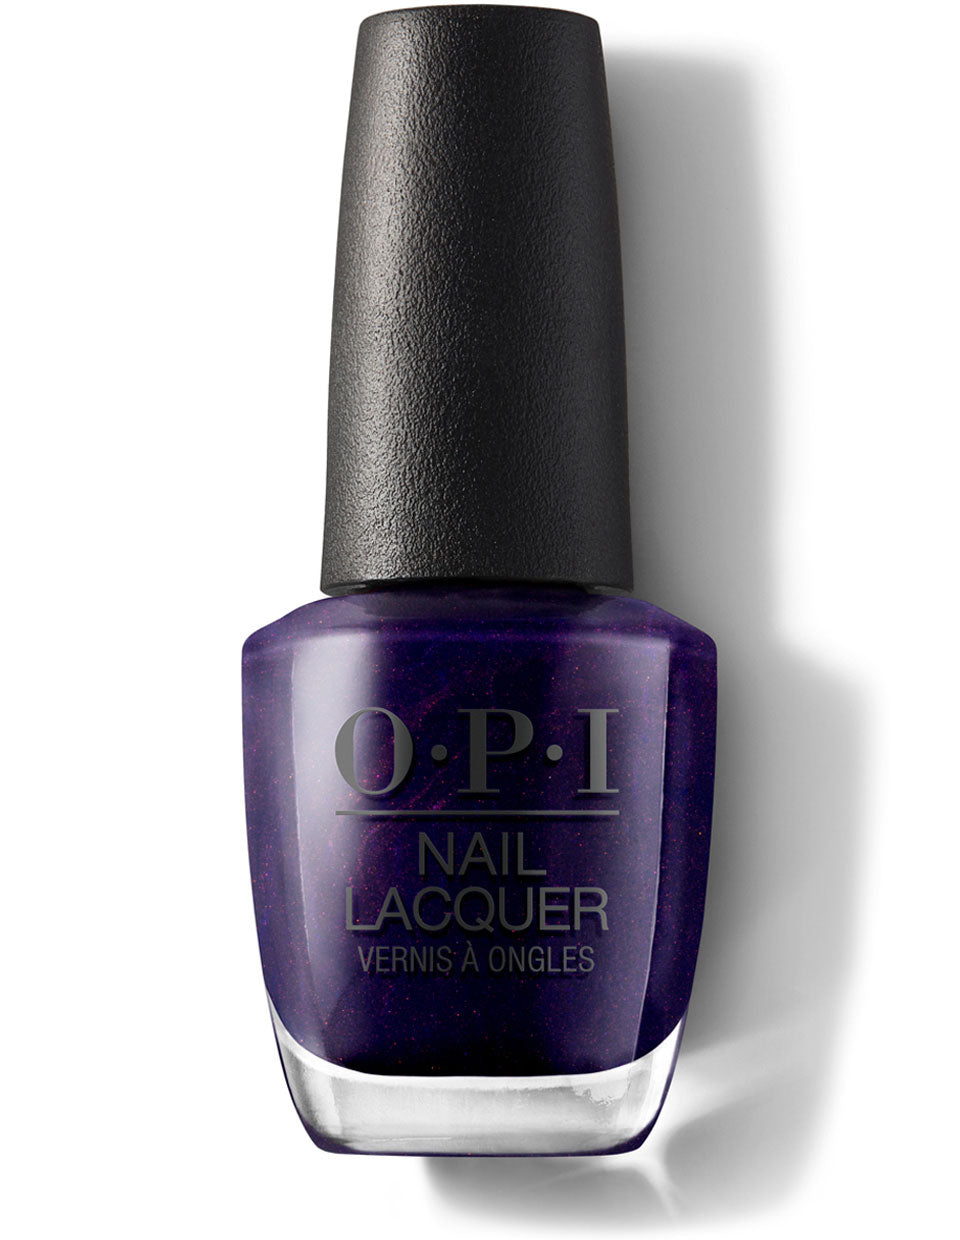 OPI Nail Lacquer ~ Turn on the Northern Lights (15ml)